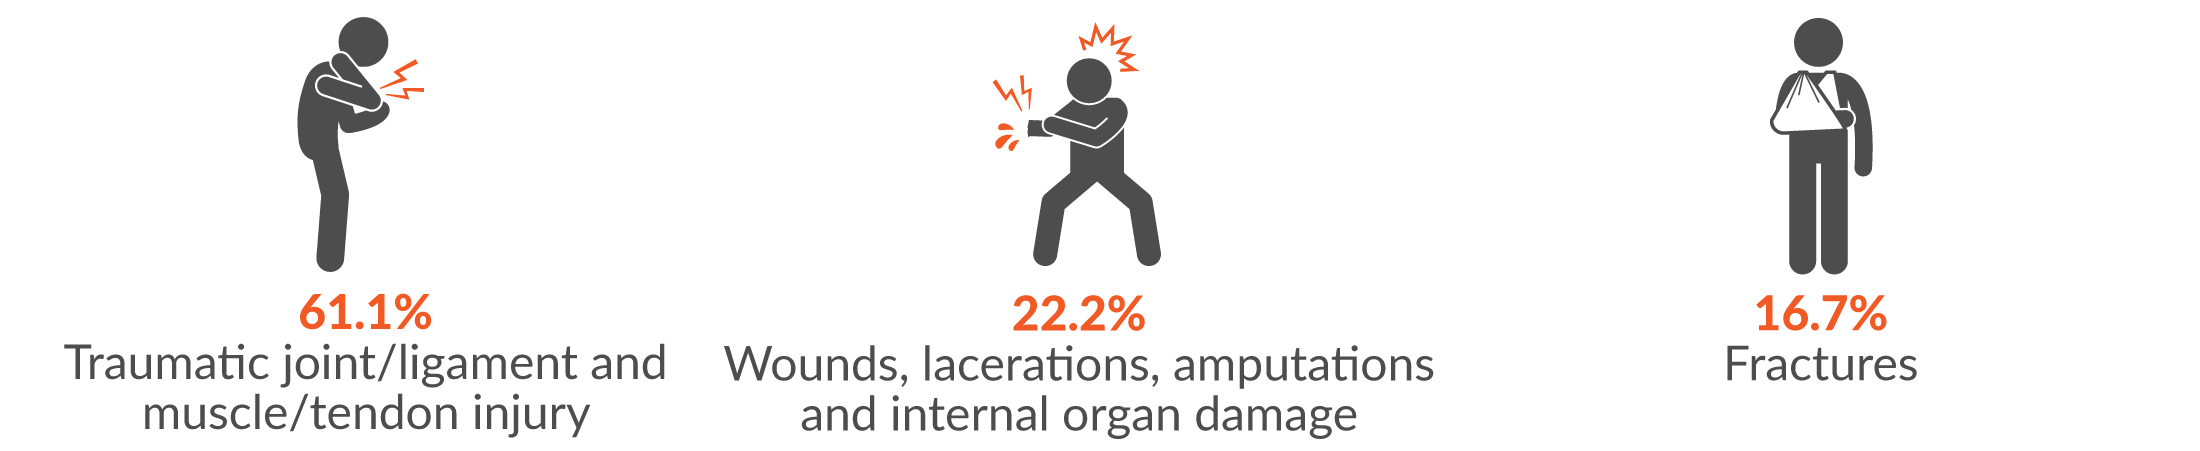 61.1% traumatic joint/ligament and muscle/tendon injury; 22.2% wounds, lacerations, amputations and internal organ damage; and 16.7% fractures.